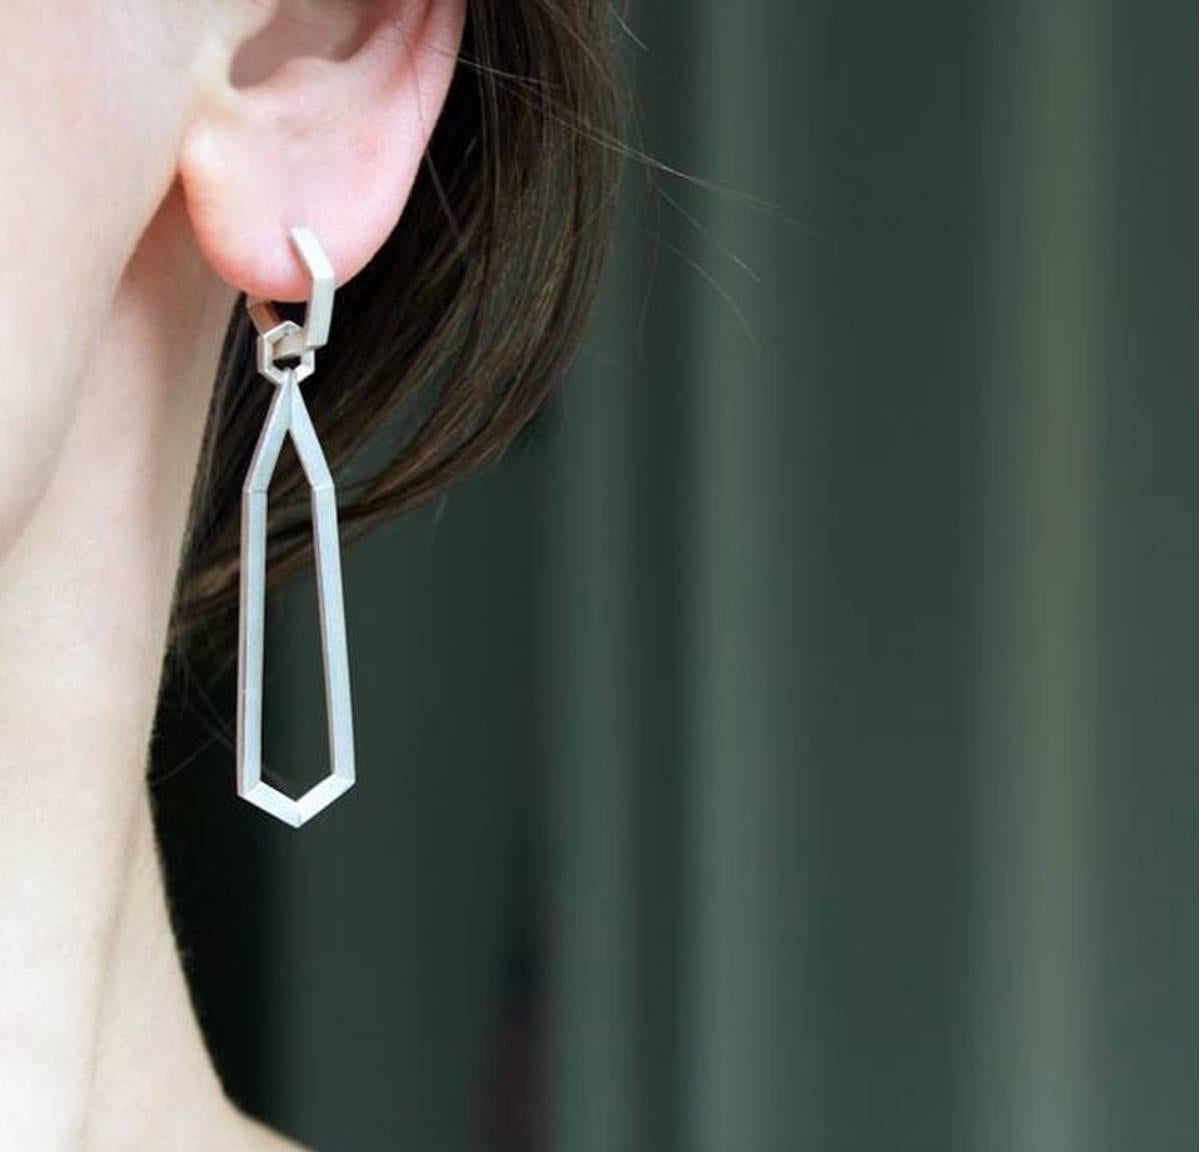 Two Earrings in one! Hex Day and Night Earrings handcrafted by renowned jewelry designer Geoffrey Good in satin-finished sterling silver showcasing a pair of detachable, elongated hexagonal drop elements attached by a hex-shaped jump-ring to a pair